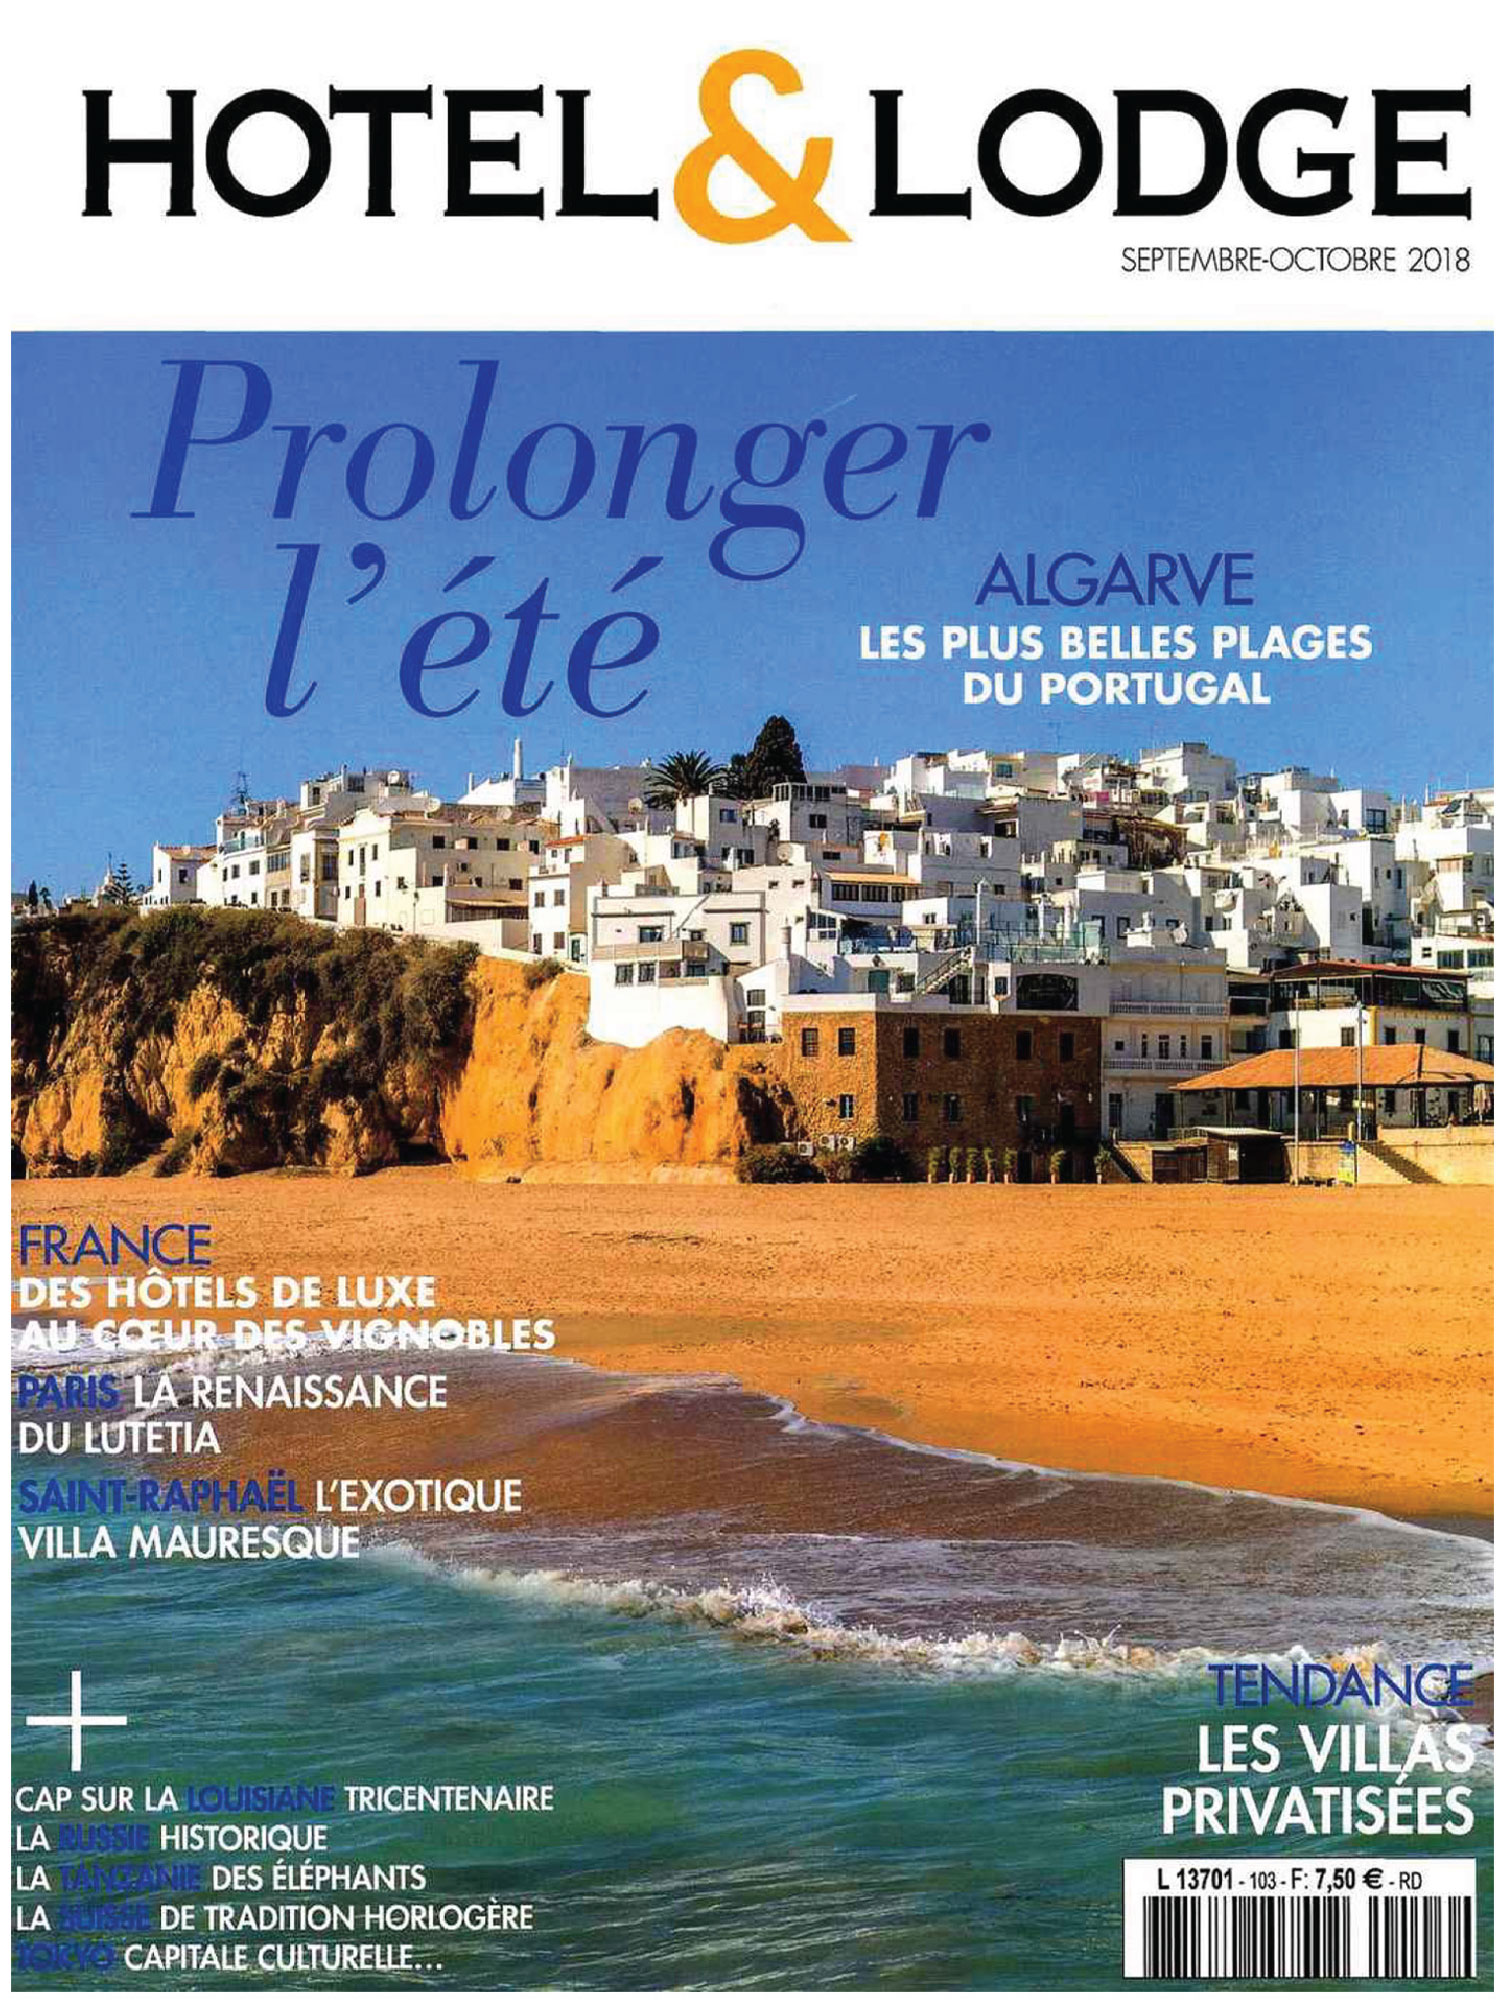 cover of the magazine hotel & lodge september 2018